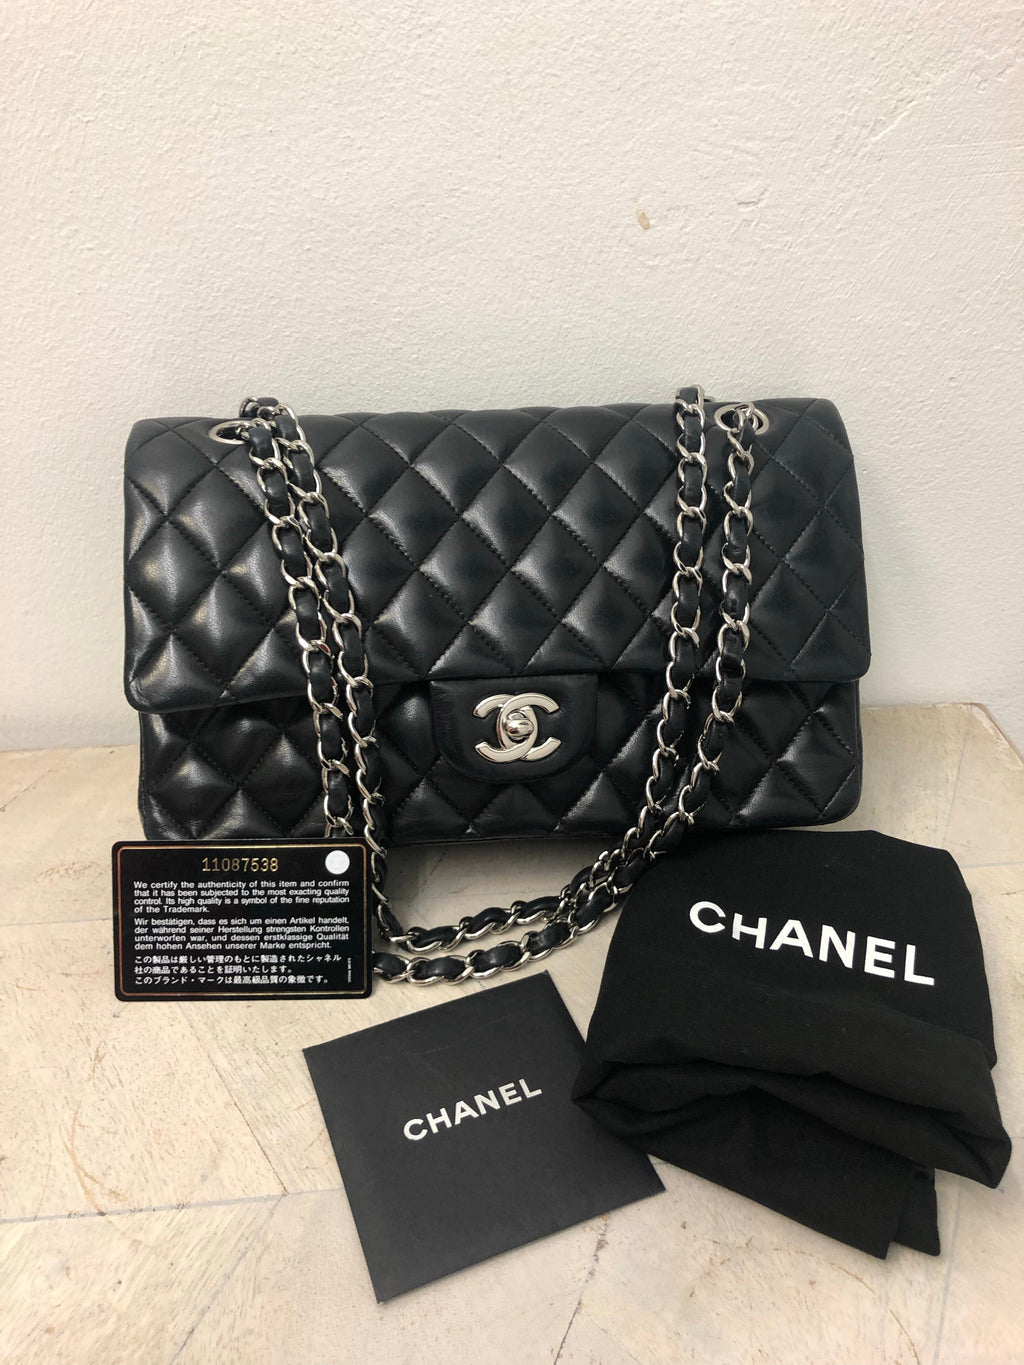 chanel black purse with silver chain